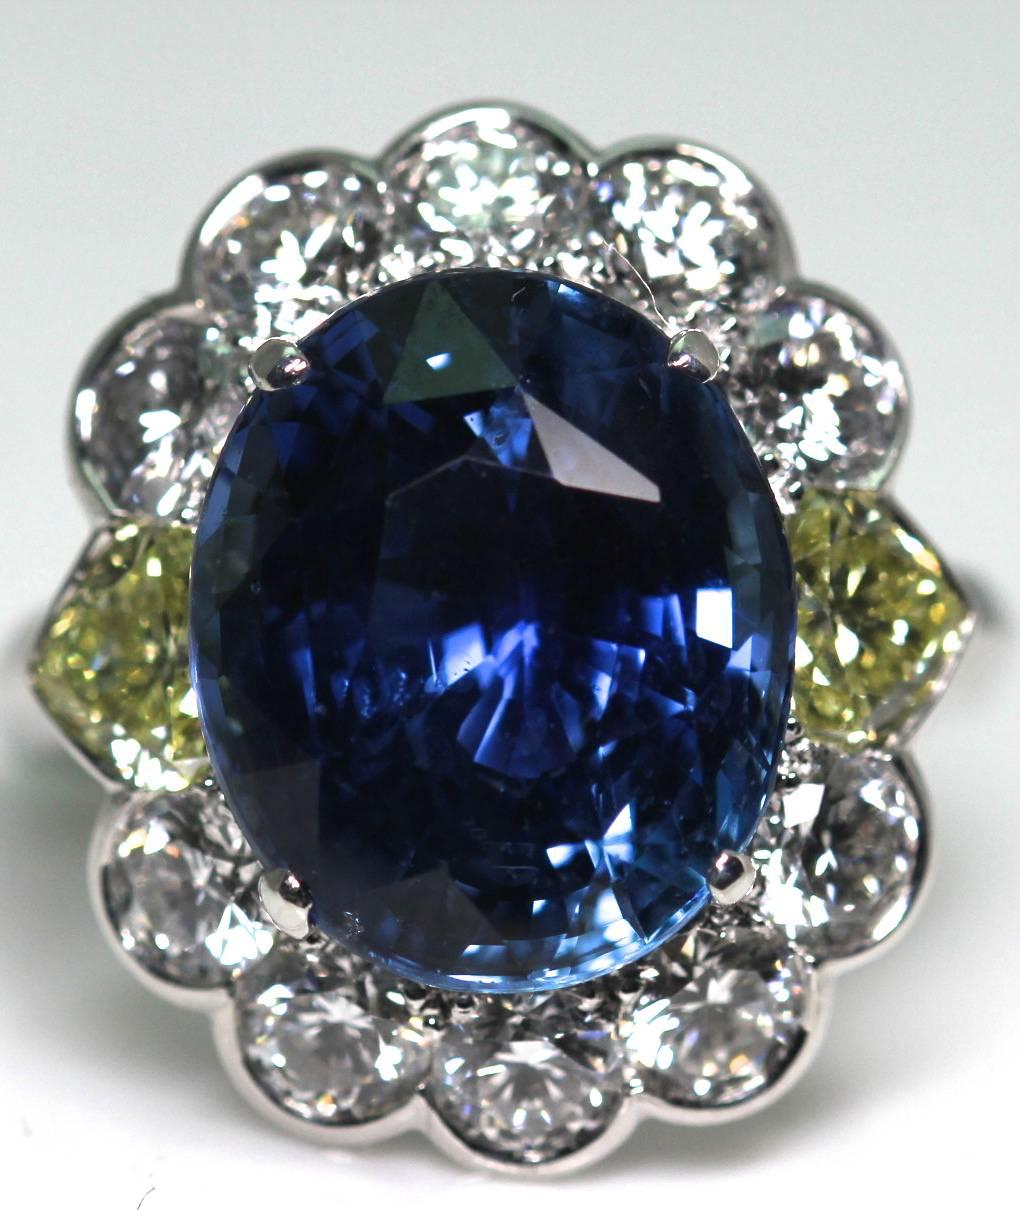 Natural Oval blue Sri Lankan Sapphire Ring weighing 9.99 cts set in a cluster diamond, accented with heart shape yellow diamonds mounted in white gold. The total weight of yellow diamonds 0.97cts, with 1.80cts of white diamonds. The sapphire is